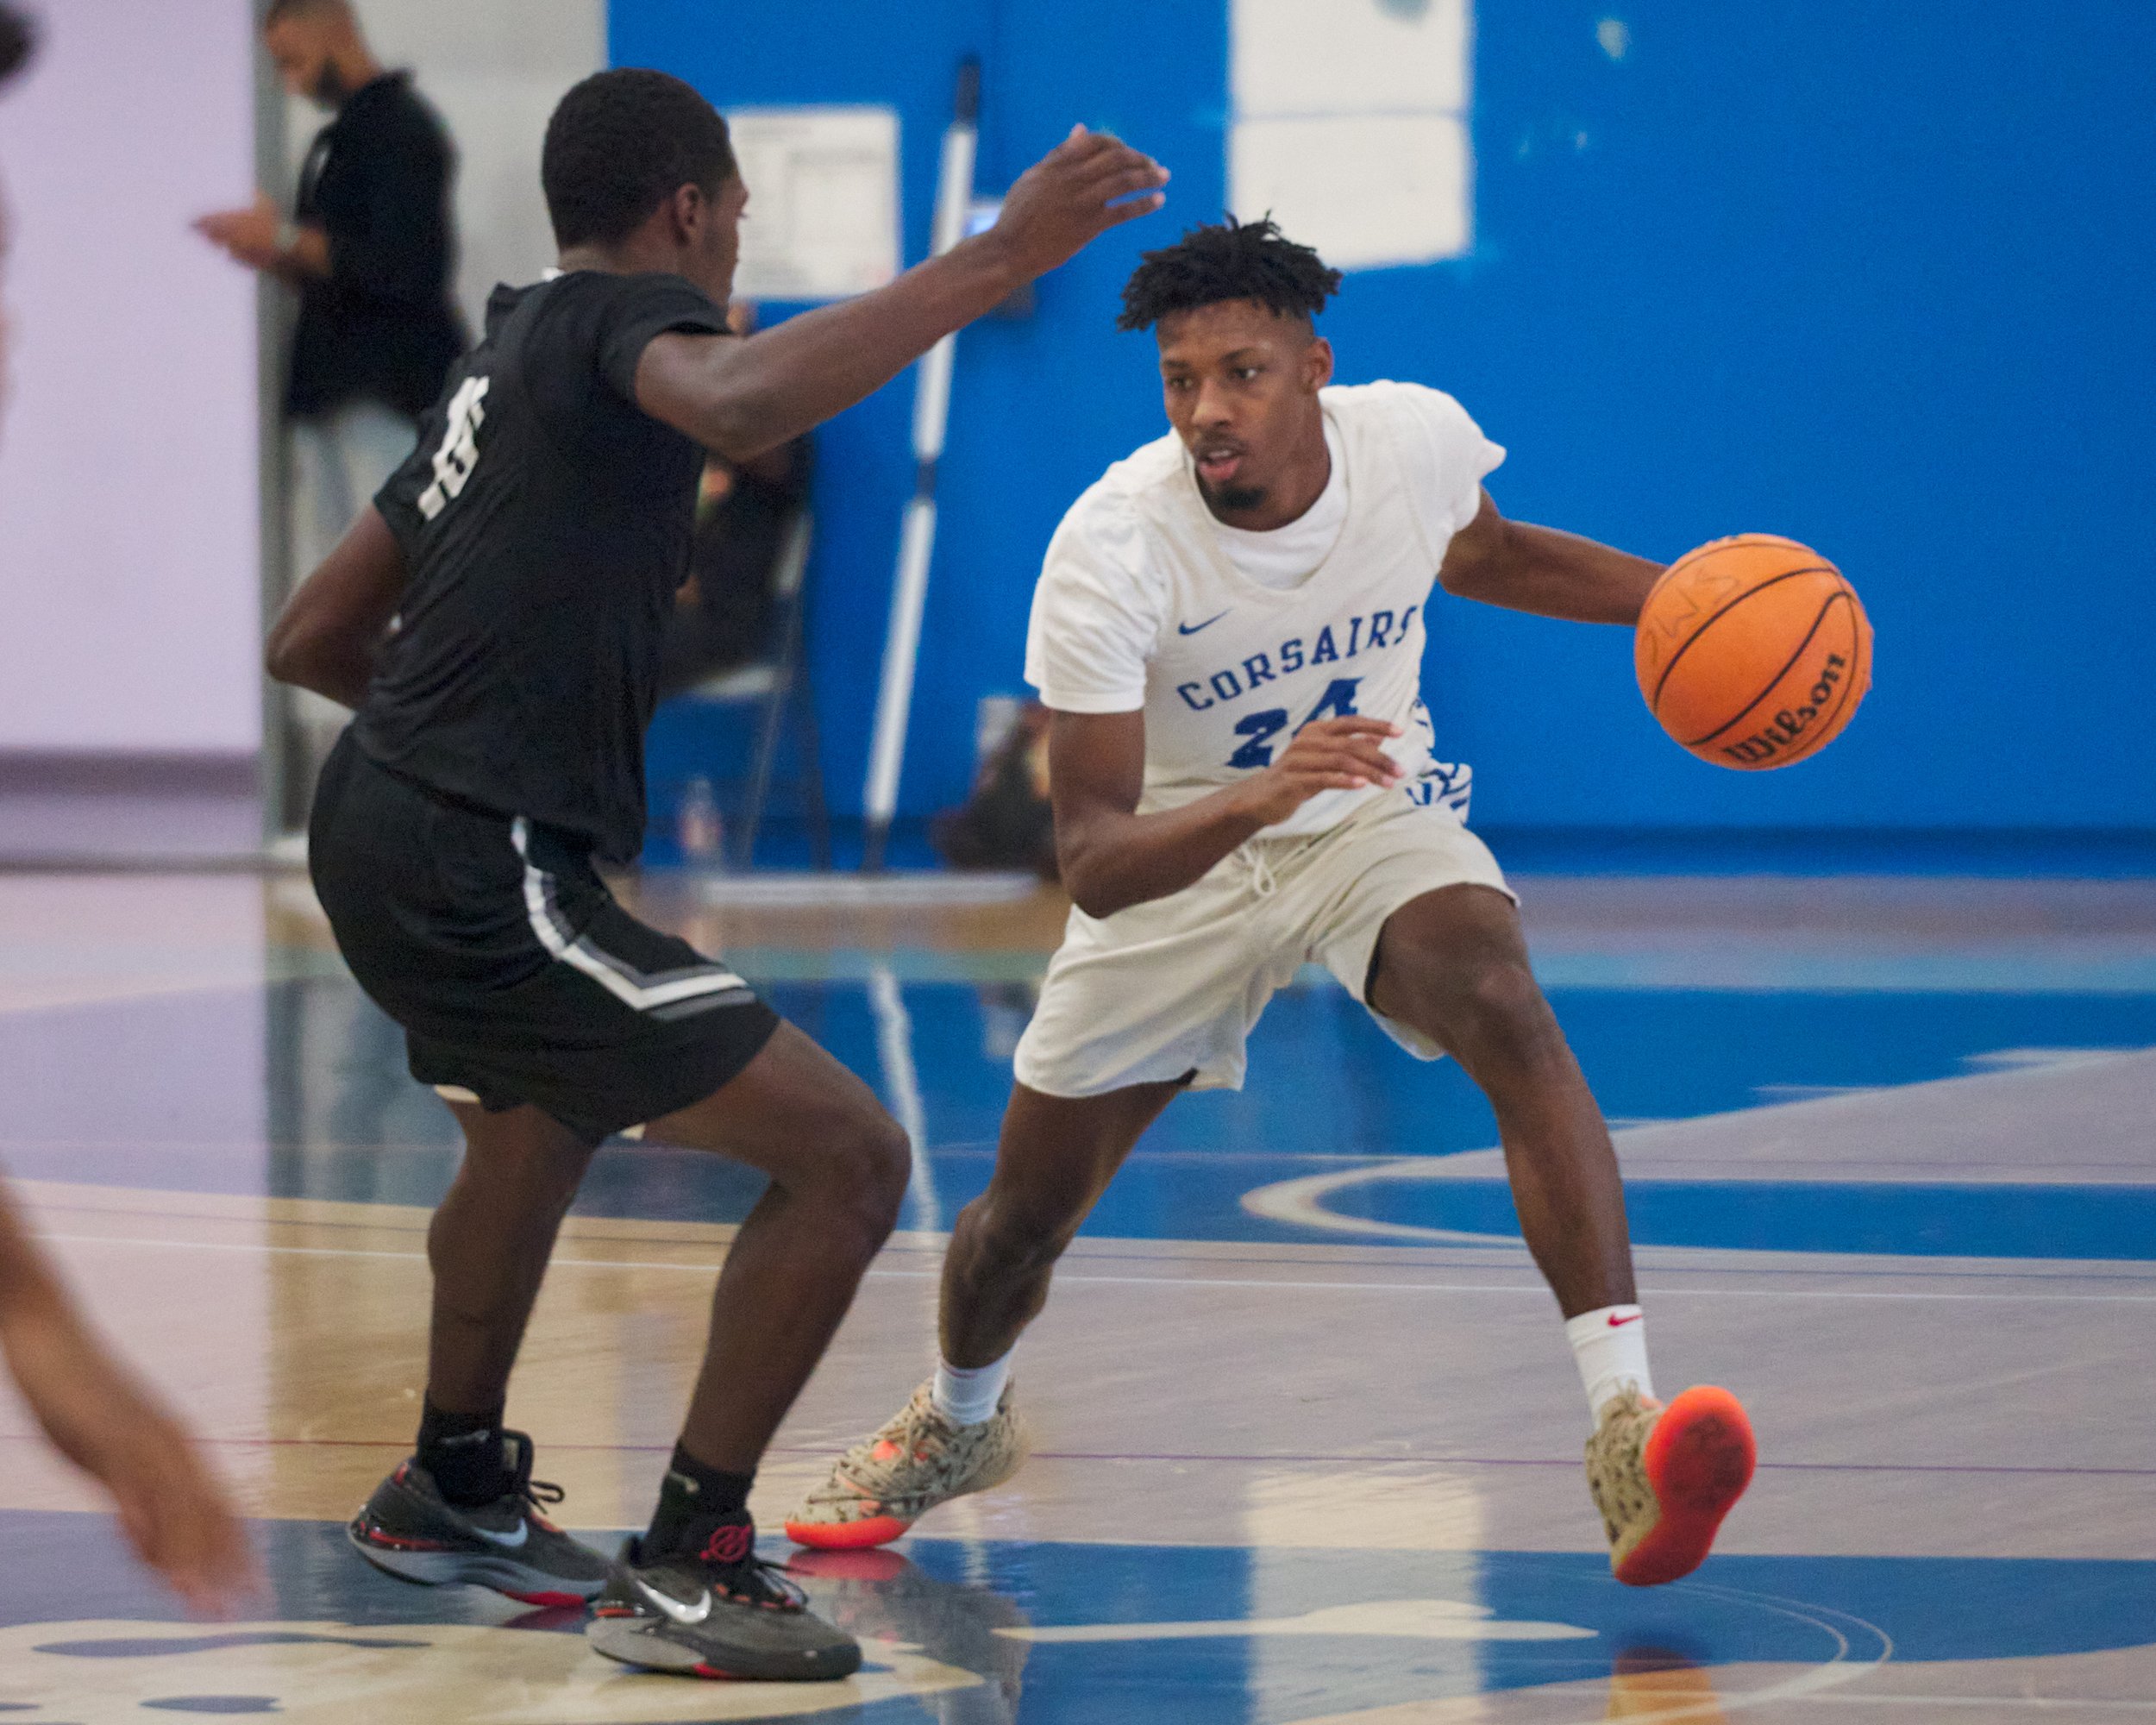  Santa Monica College Corsairs' Mike Hill (right) and Compton College Tartars' Jamerion Fouce (left) during the men's basketball game on Wednesday, Nov. 8, 2023, at Corsair Gym in Santa Monica, Calif. The Corsairs won 94-86. (Nicholas McCall | The Co